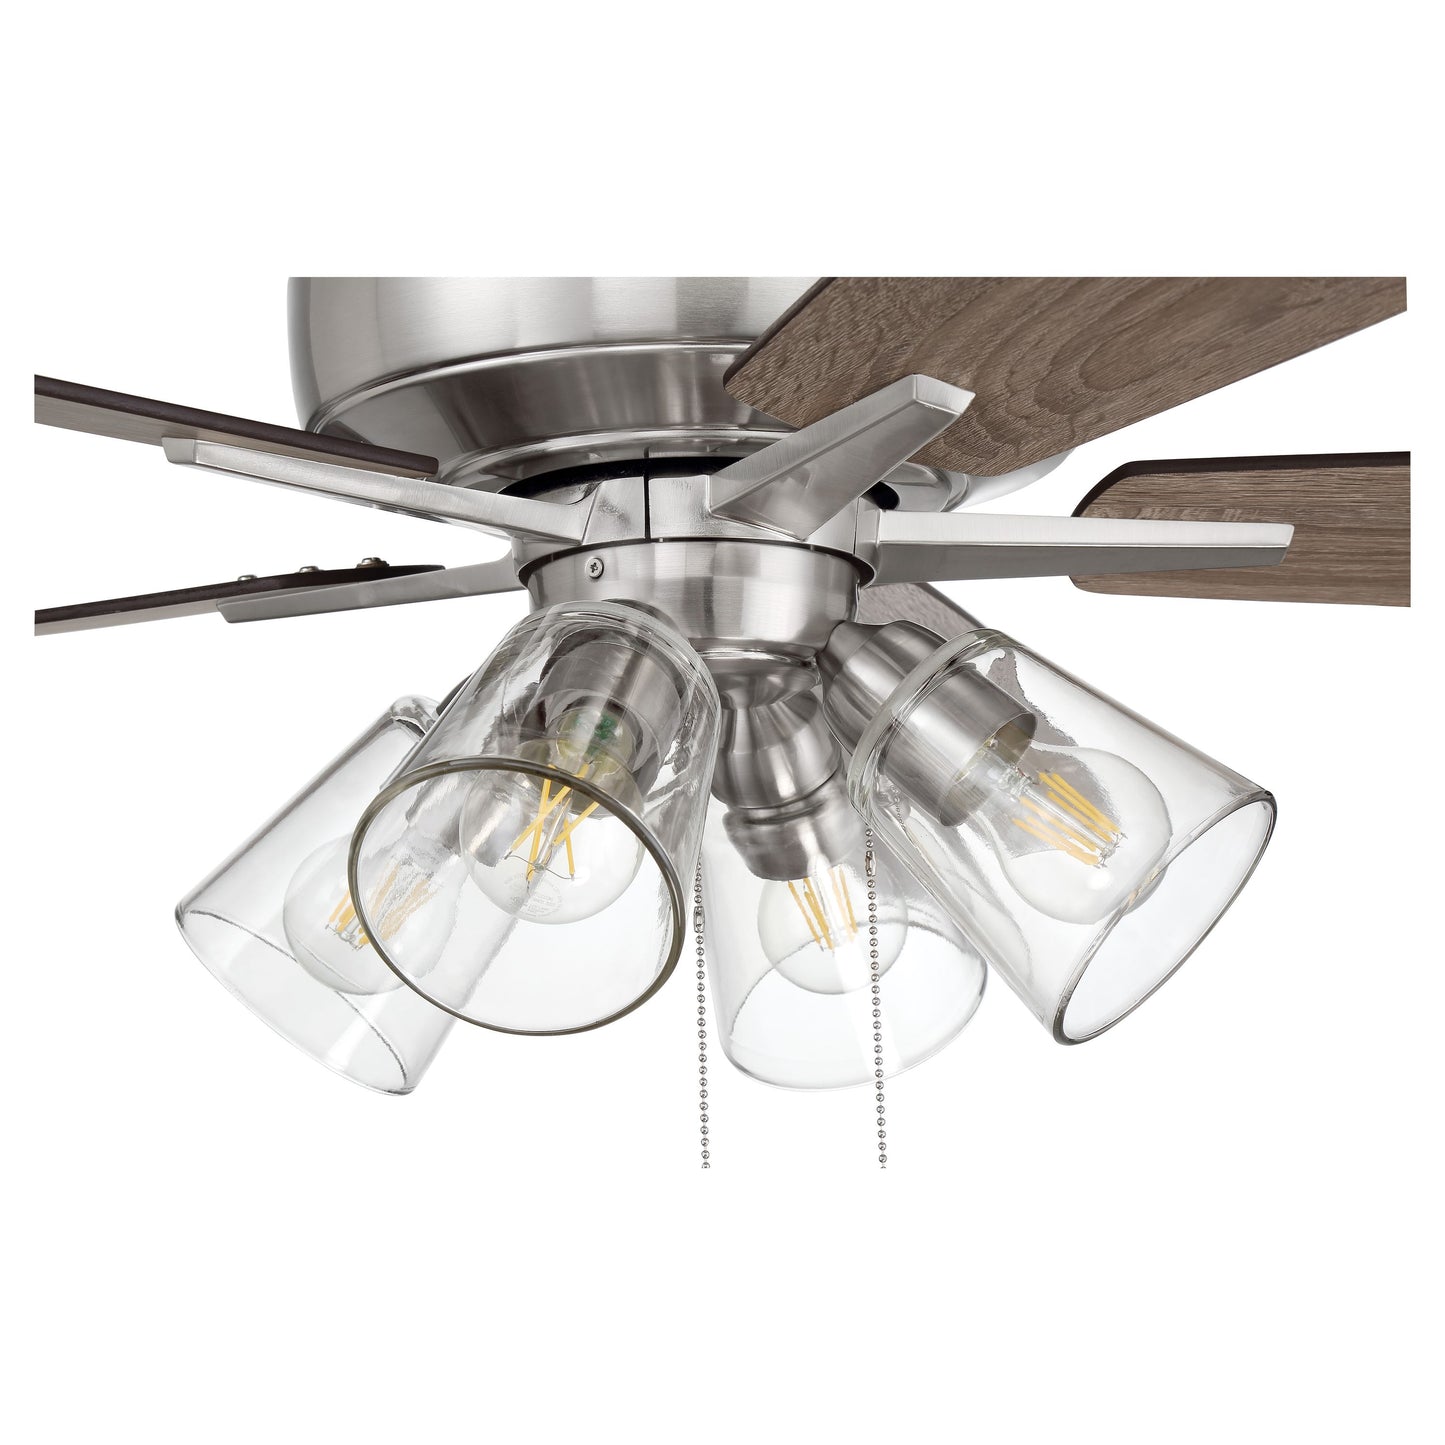 S104BNK5-60DWGWN - Super Pro 104 60" 5 Blade Ceiling Fan with Light Kit - Pull Chain - Brushed Polis